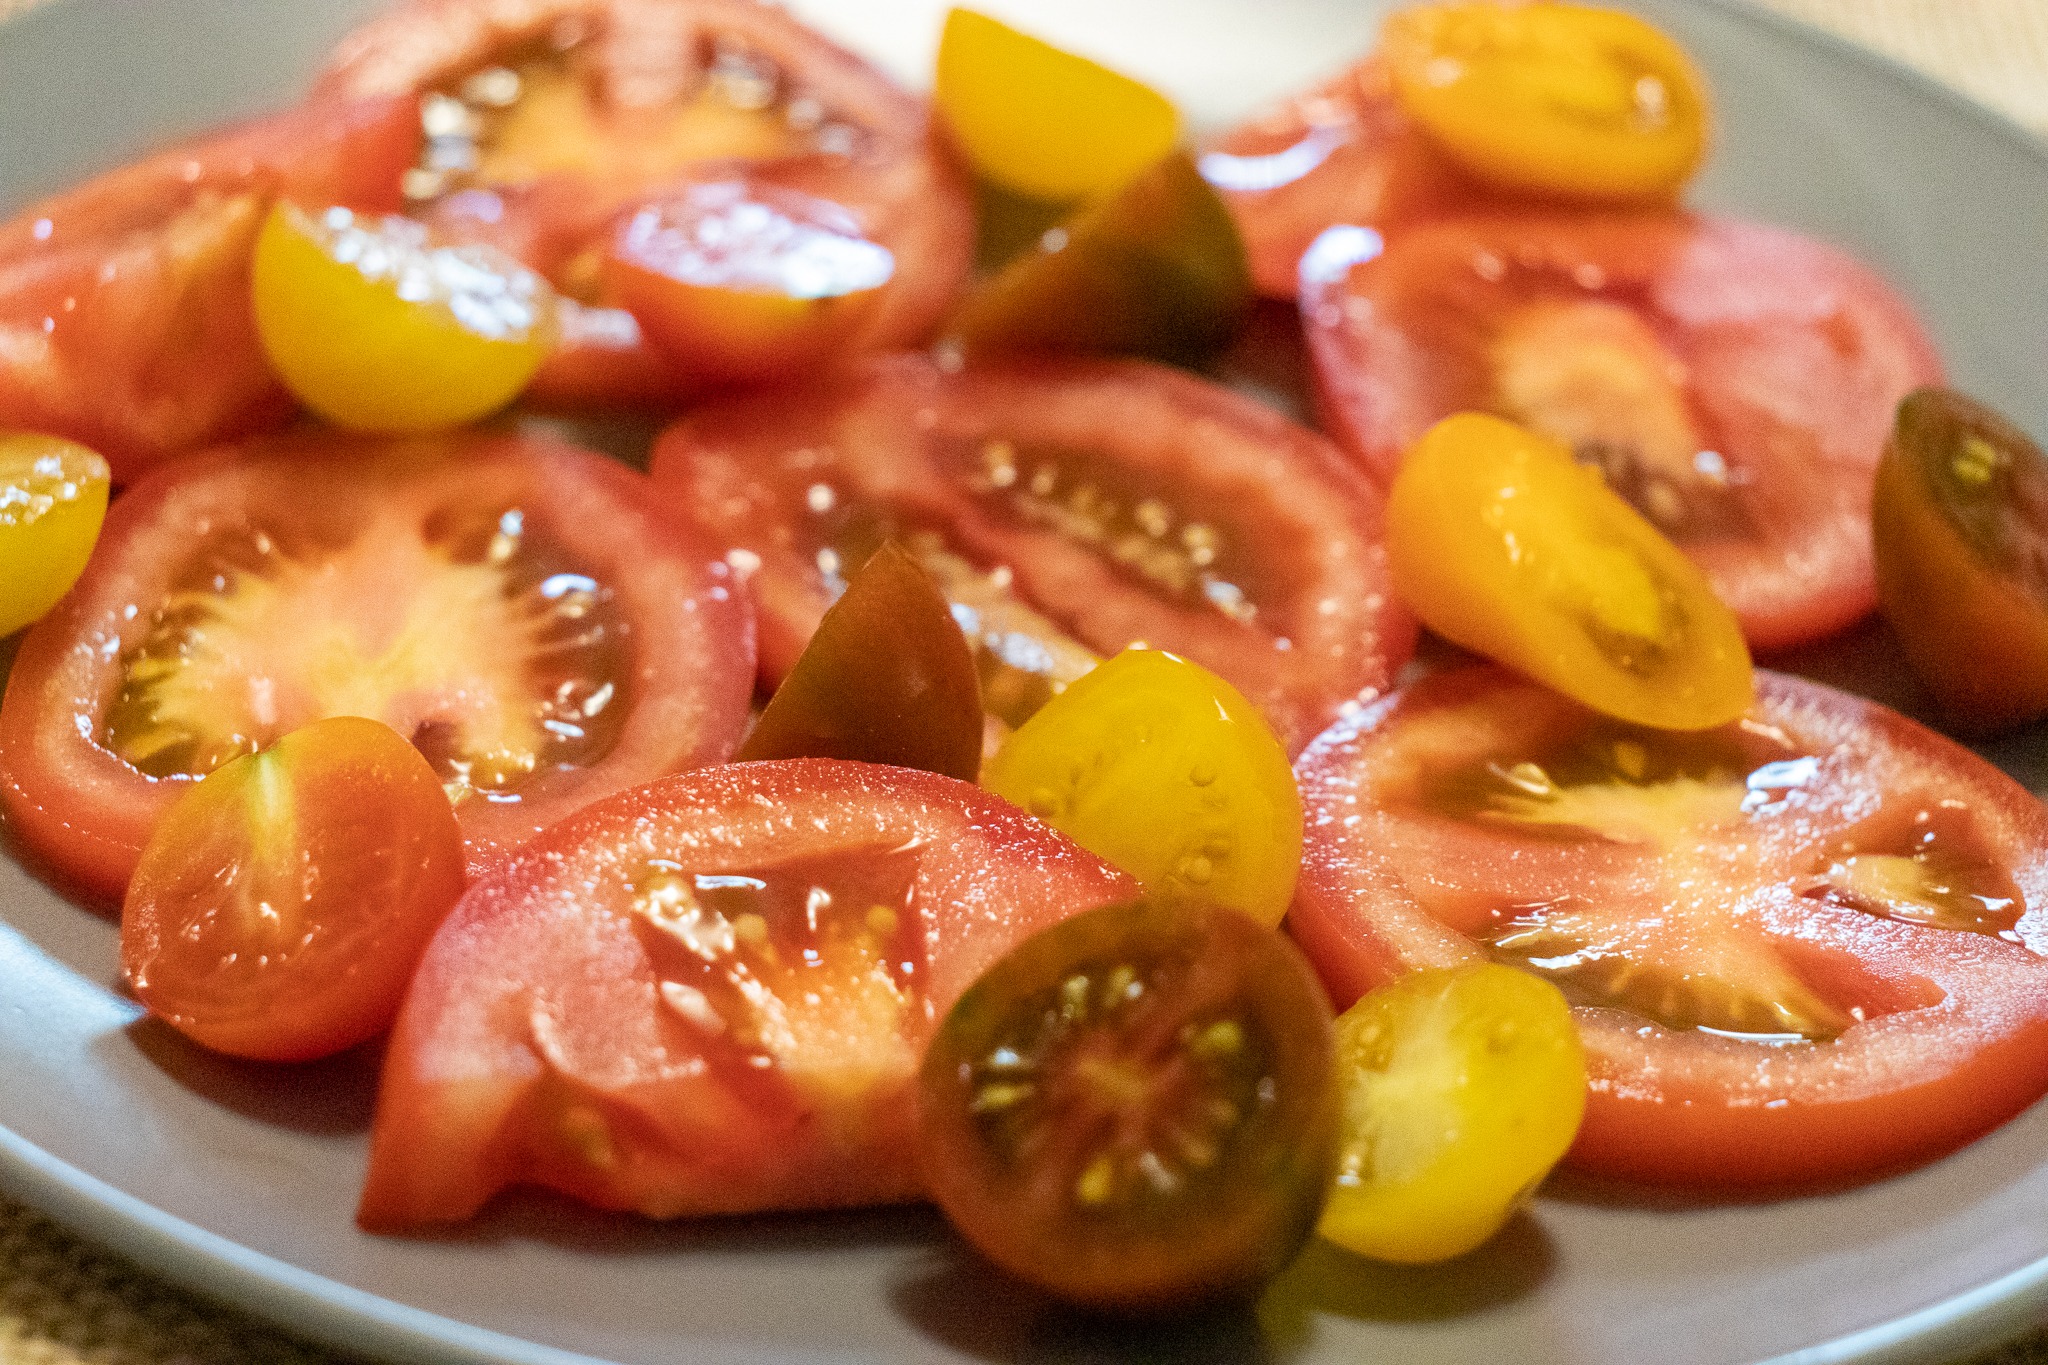 Sliced tomatoes arranged on a plate